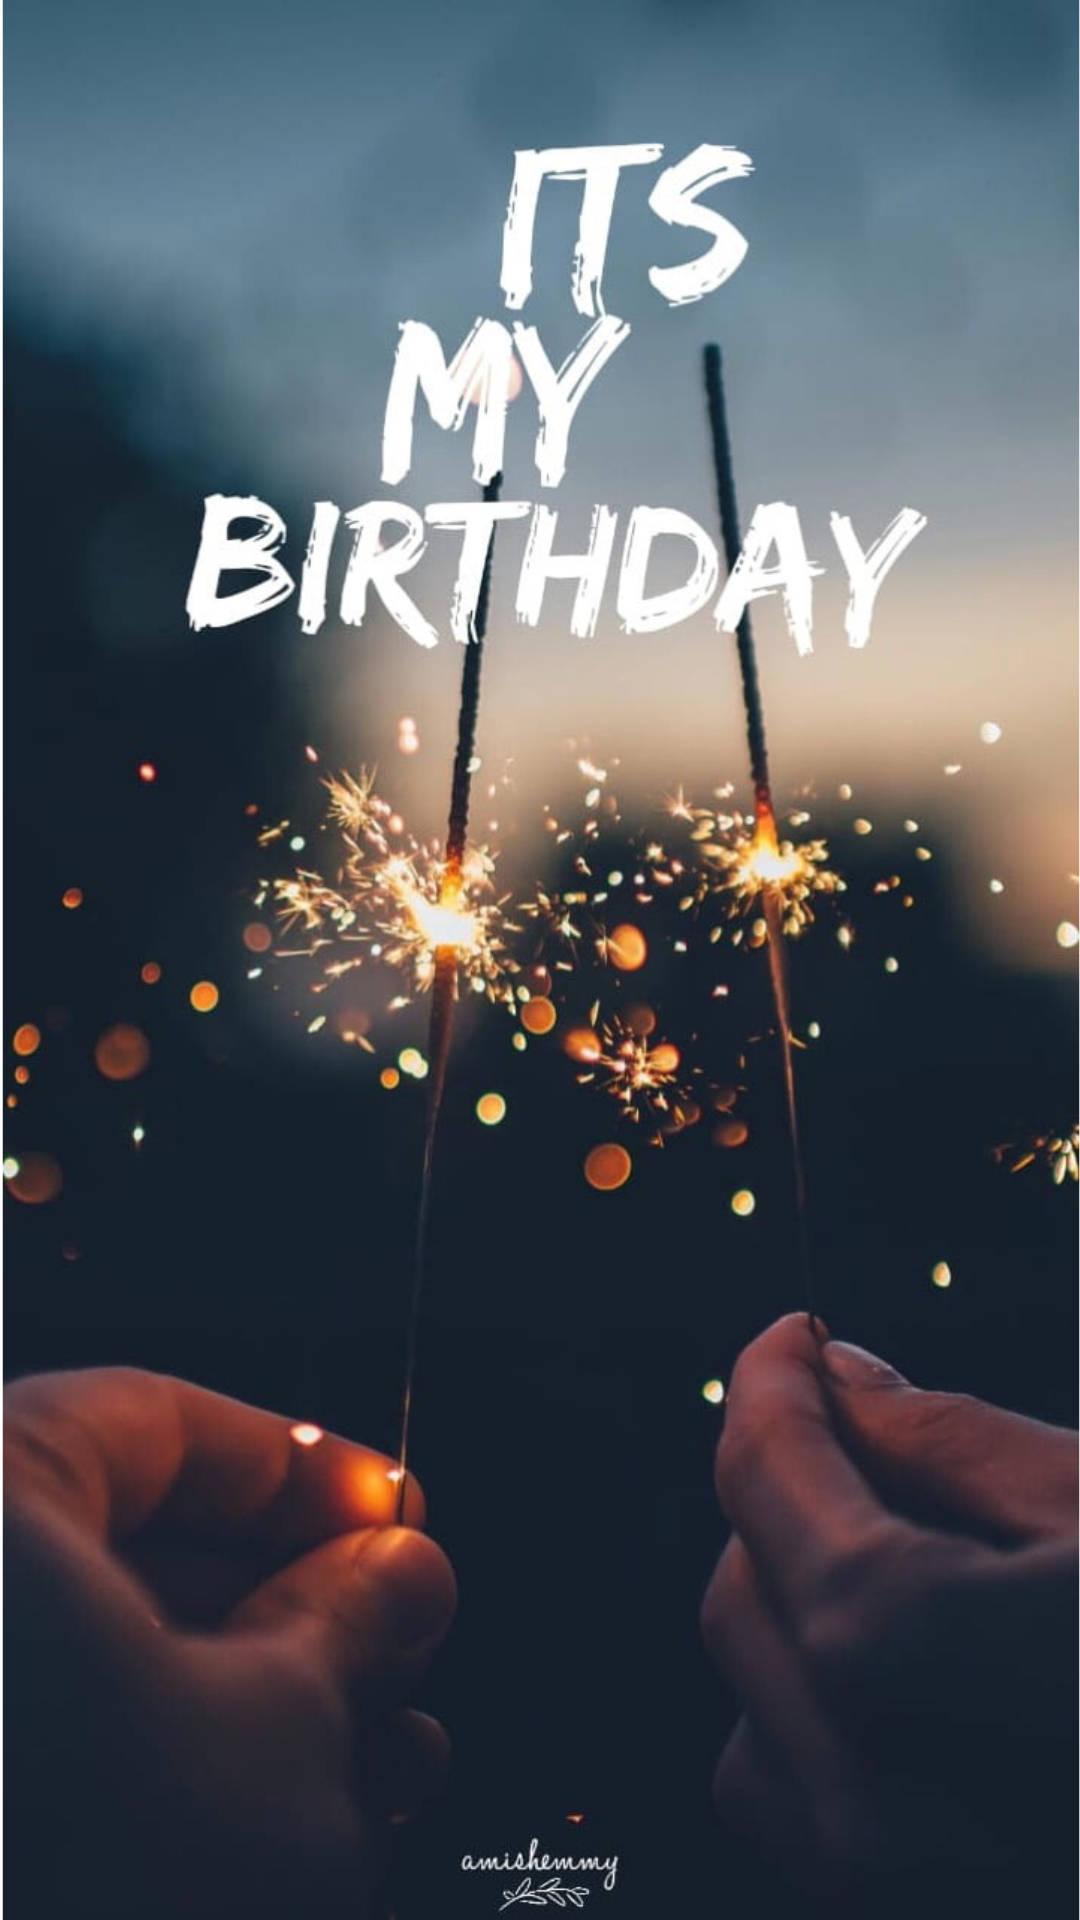 Today Is My Birthday Wallpapers - Top Free Today Is My Birthday ...